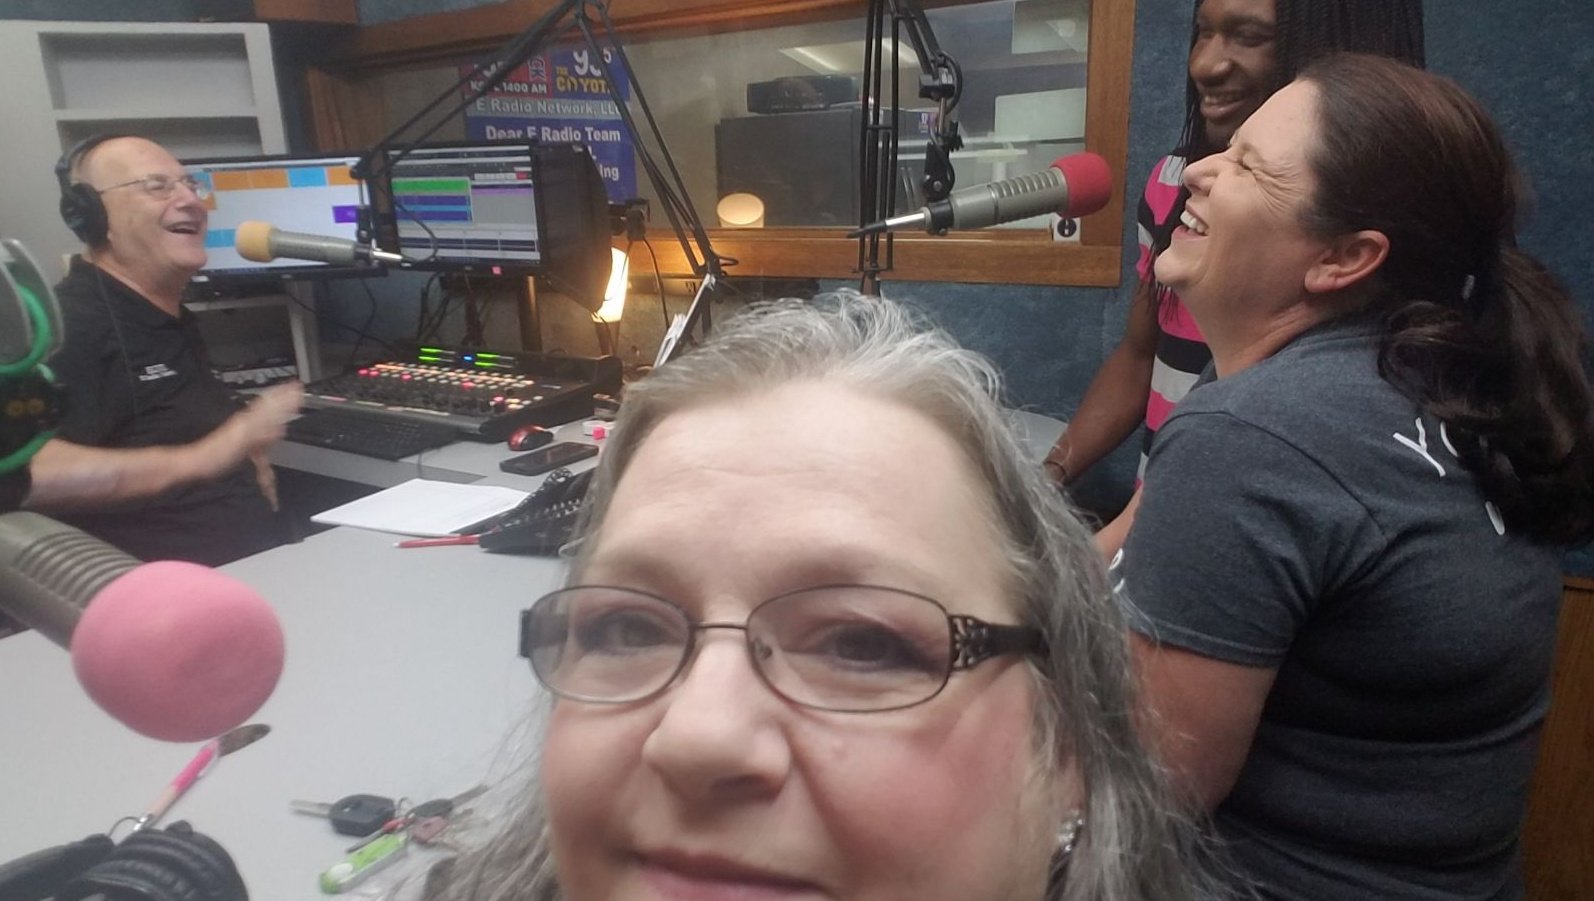 Lonnie J with KGVL local radio station interviews Pastor Deana Lowe, Meghan and Ty about the Chili Cook-Off/Games/Silent Auction Event and 1948 Fire Truck!